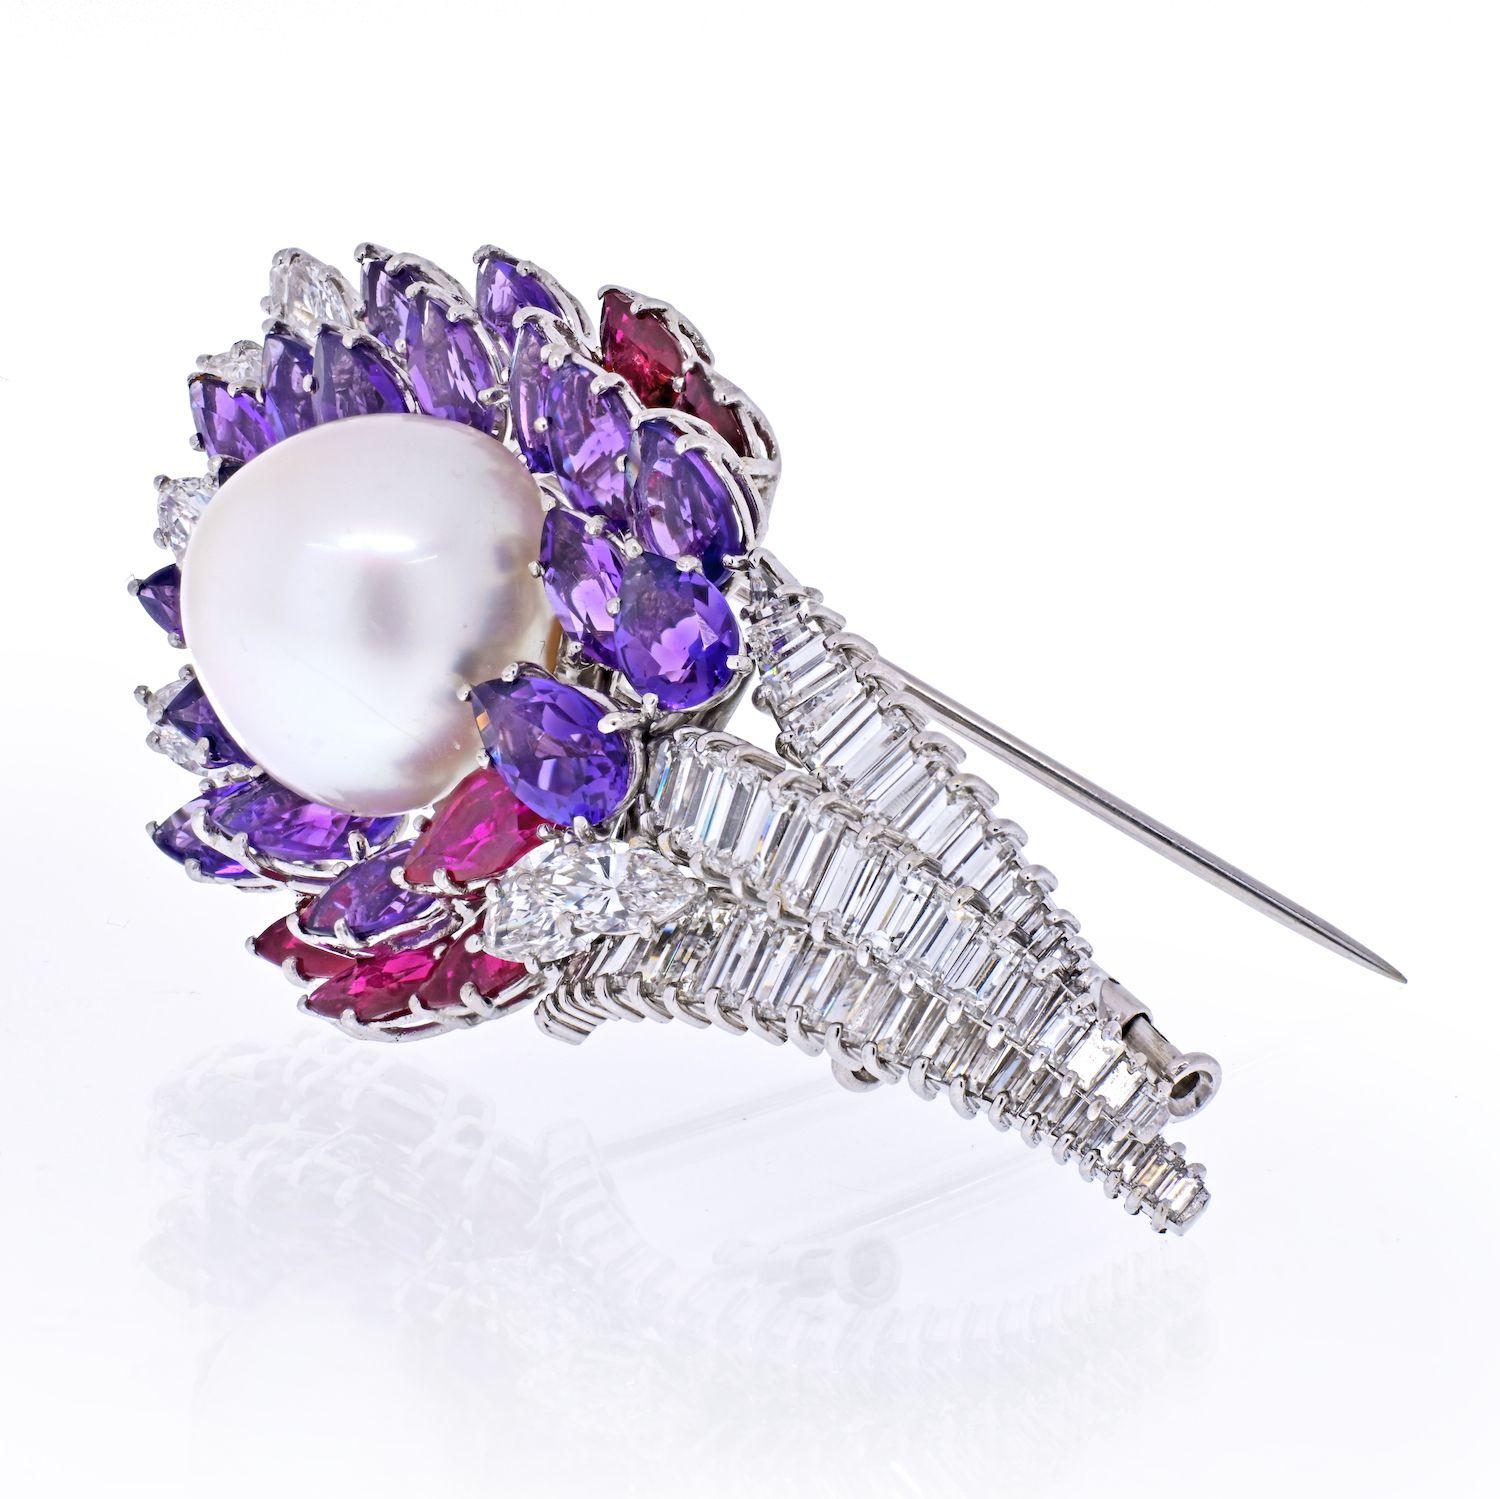 This stunning and one of a kind brooch is designed by David Webb, crafted in platinum set with baguette-, marquise- and pear brilliant-cut diamonds, weighing a total of approximately 6.30 carats, most with F-G color and VS clarity; accented by pear-